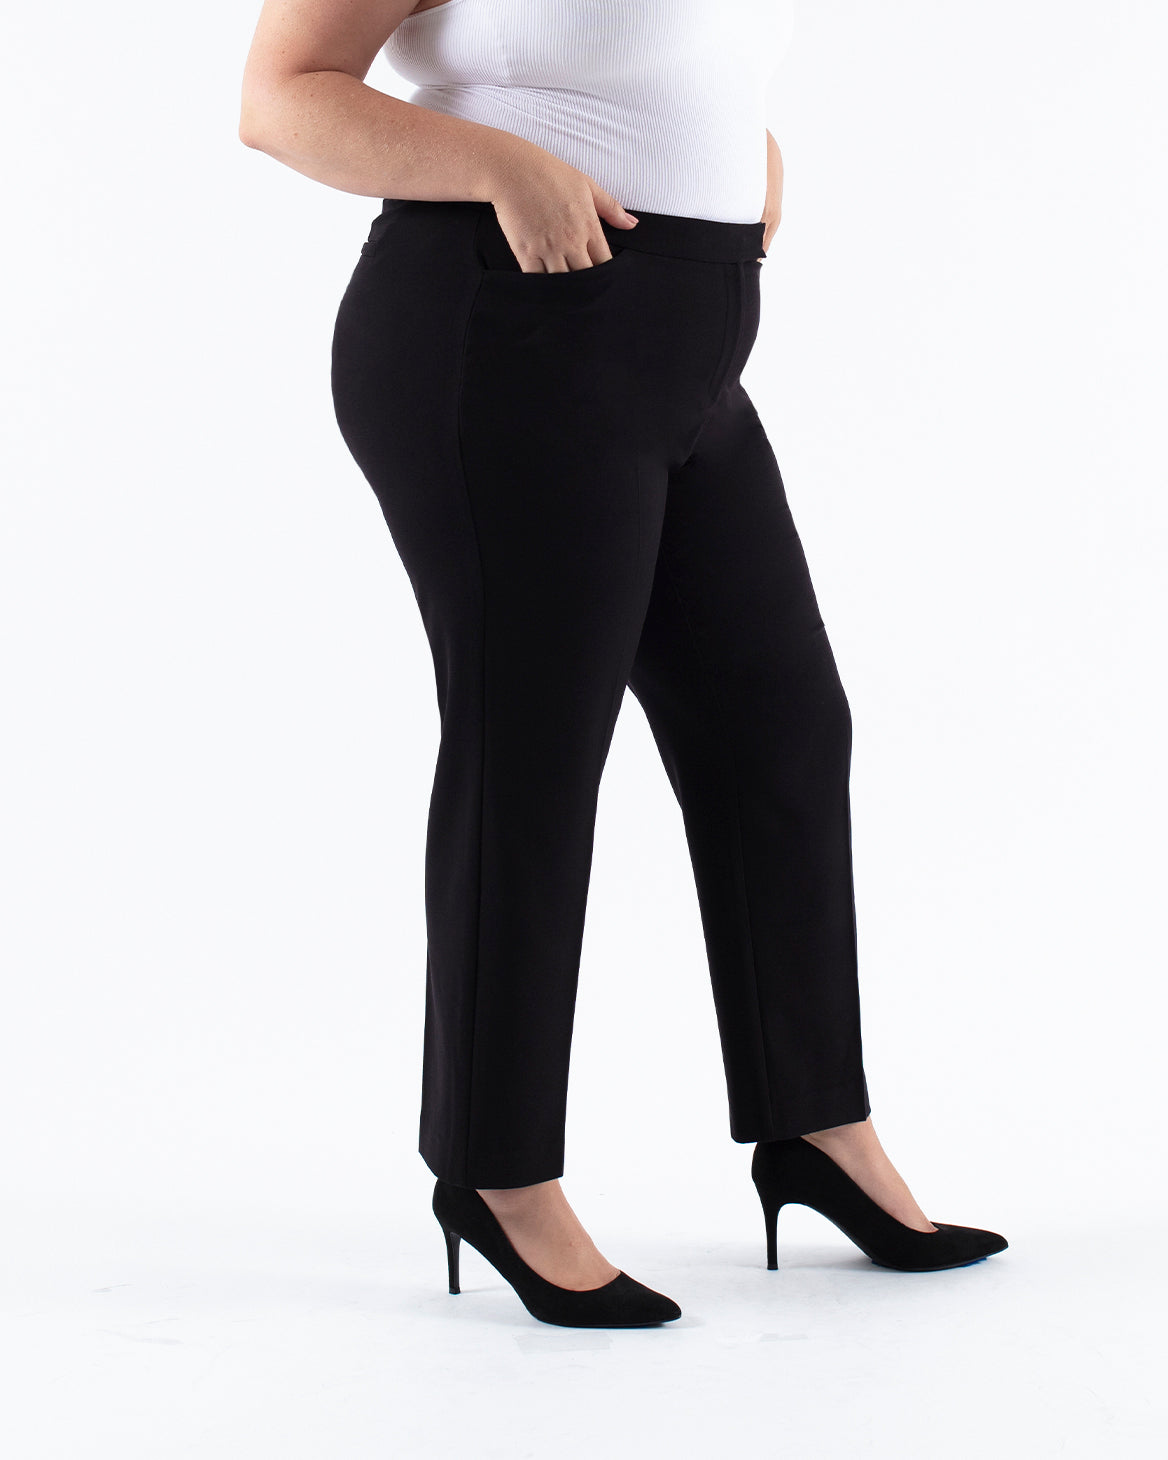 Ankle Front Zip Pant